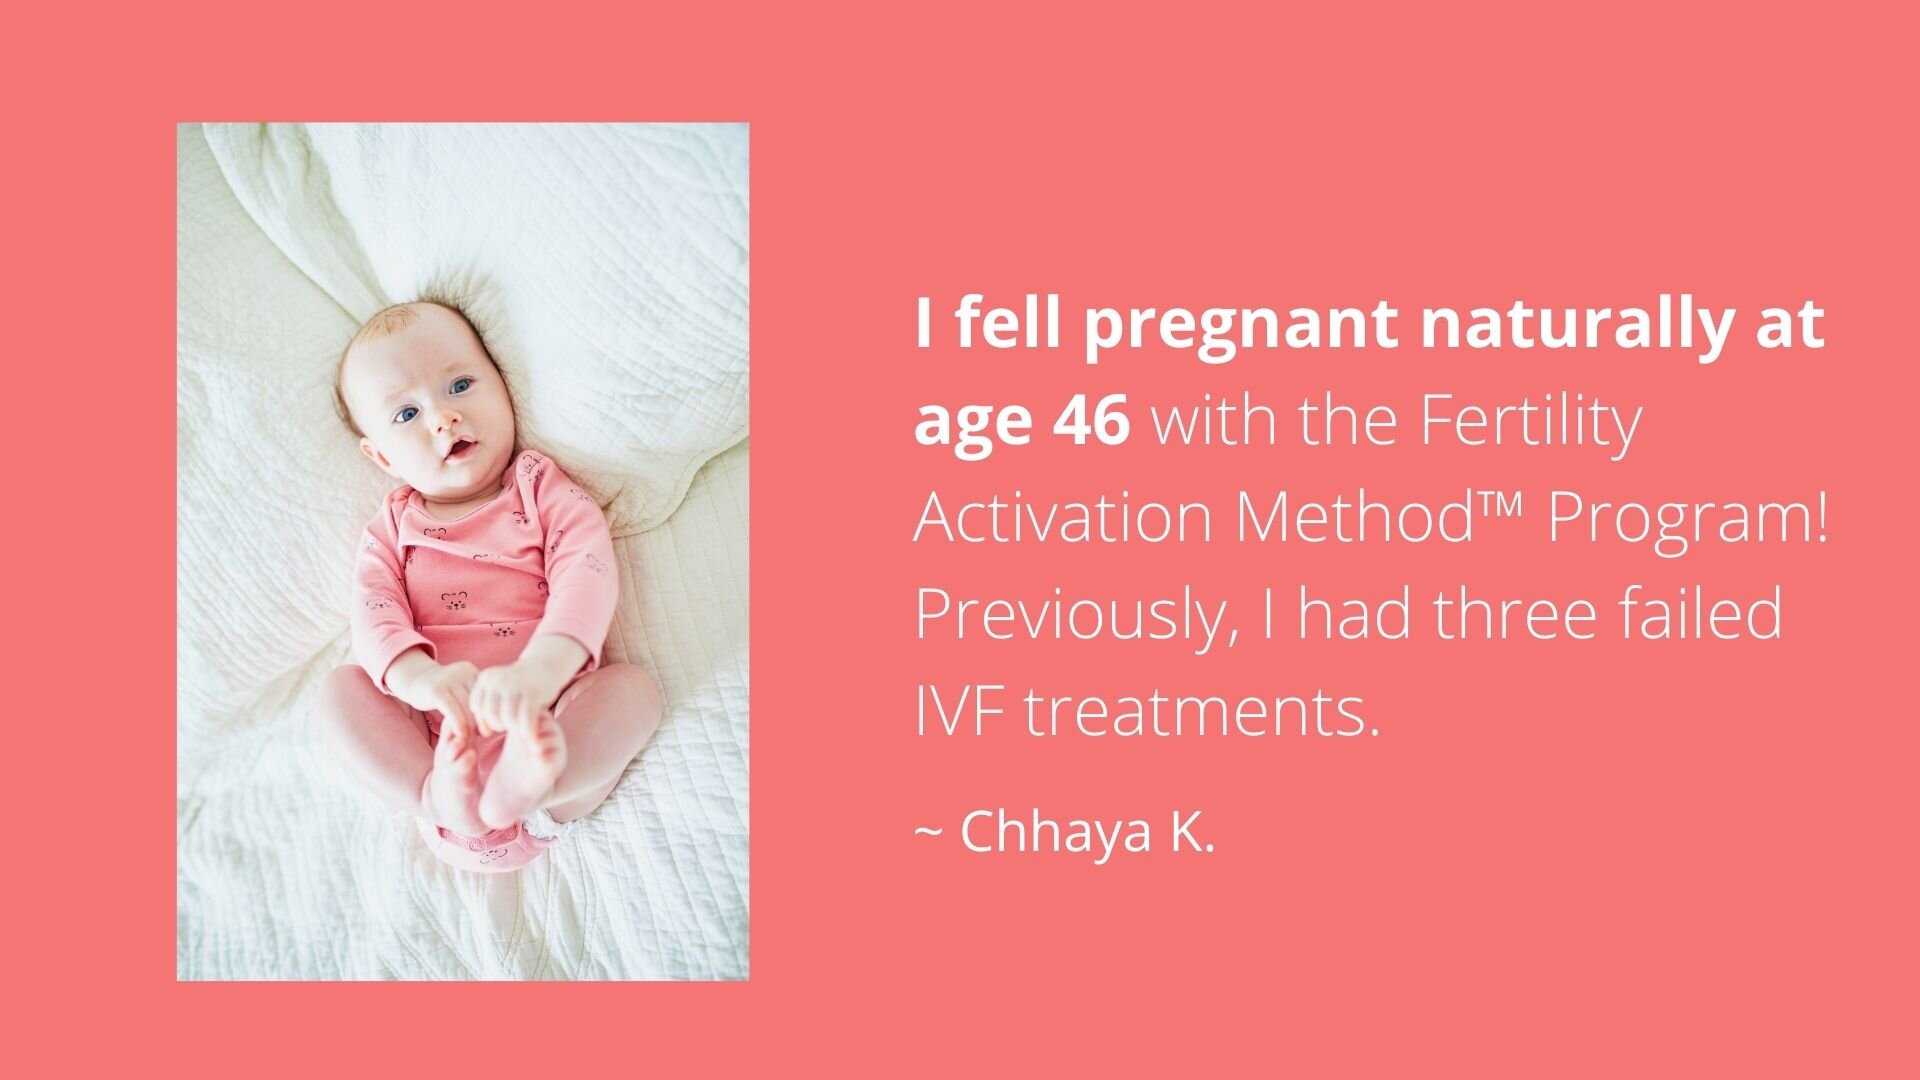 PREGNANT NATURALLY AT AGE 46 AFTER 3 FAILED IVFS!